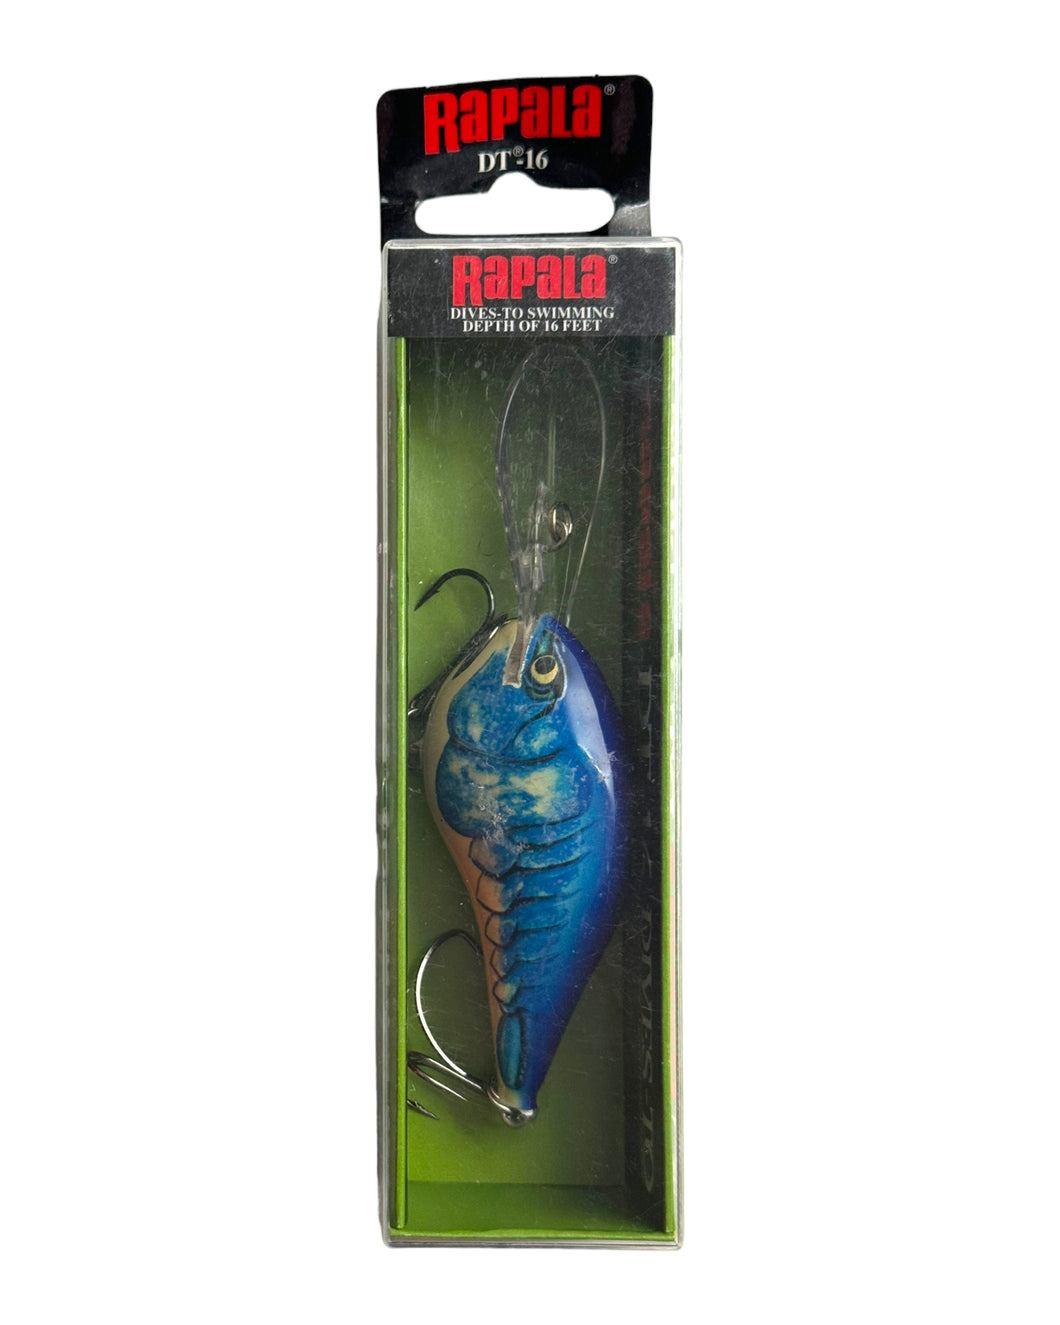 RAPALA LURES DT-16 Fishing Lure in MOLTING BLUE CRAW